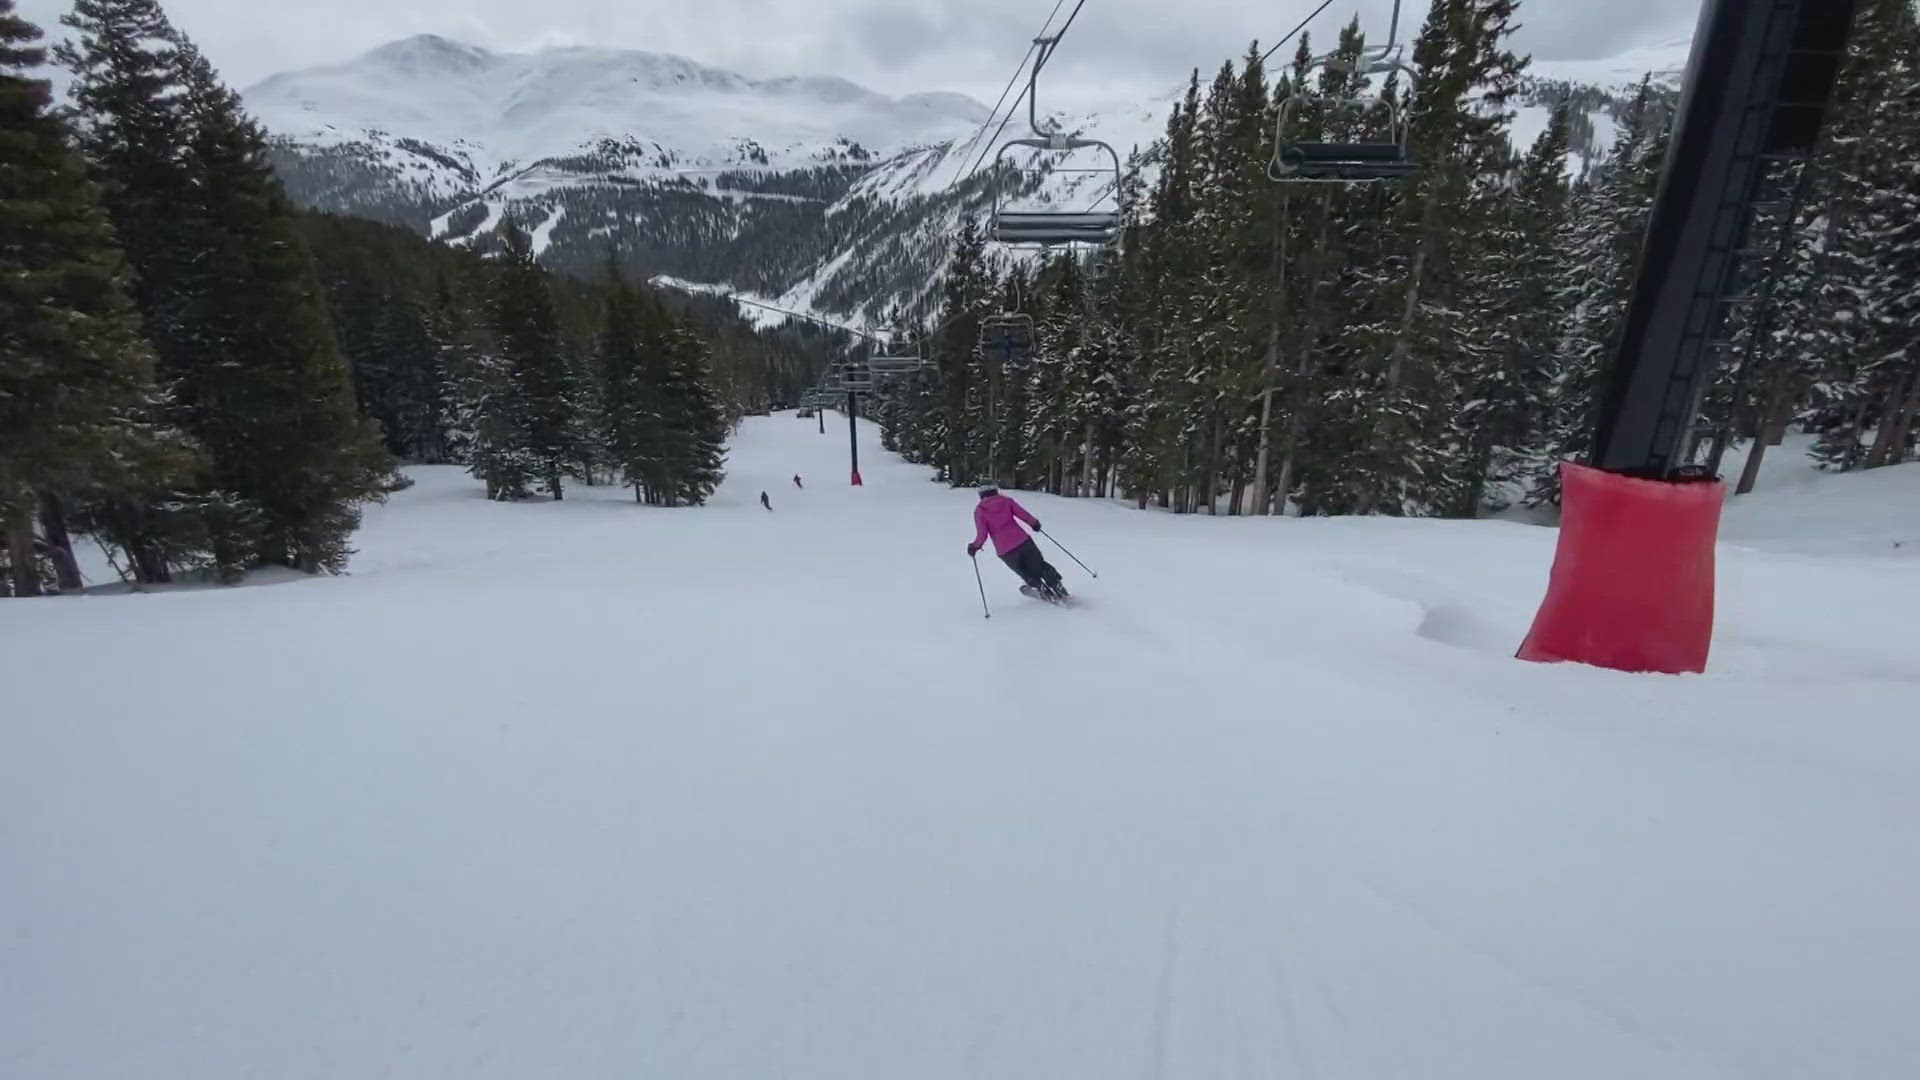 It snowed in the mountains Thursday night, so Loveland Ski Area got to go out for the year with fresh powder.